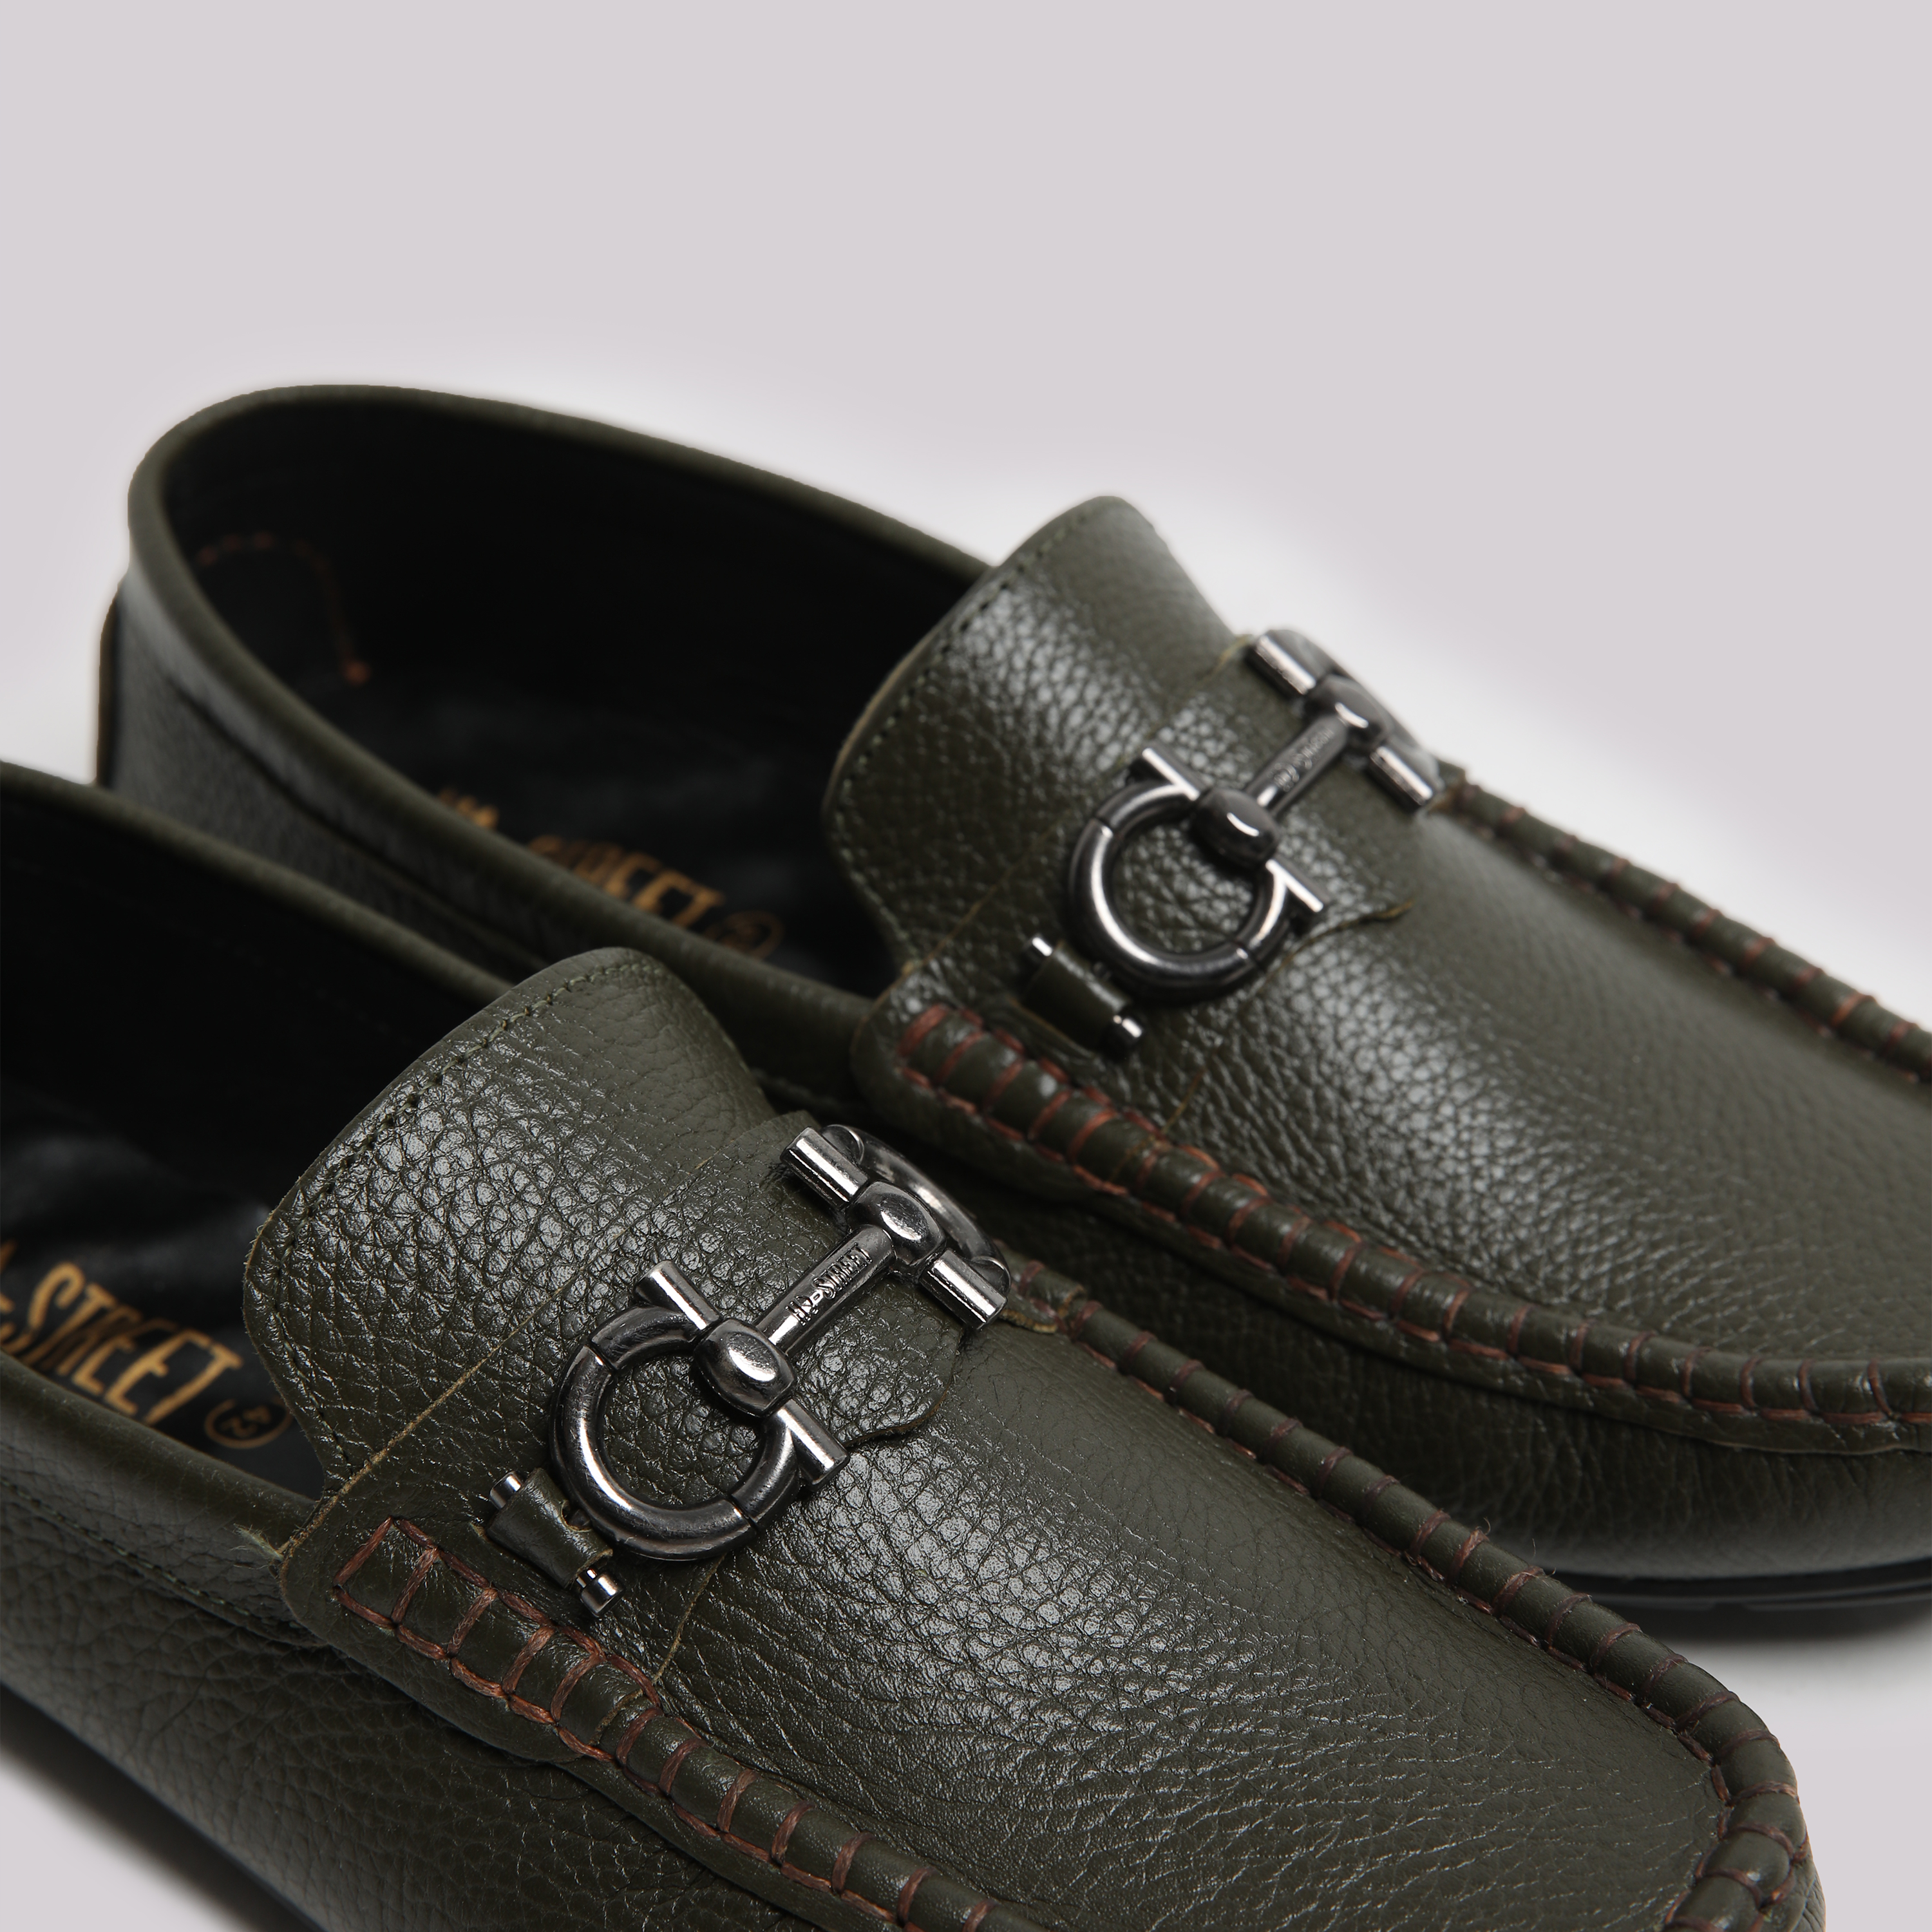 SOFT LEATHER BUCKLE MOCCASIN